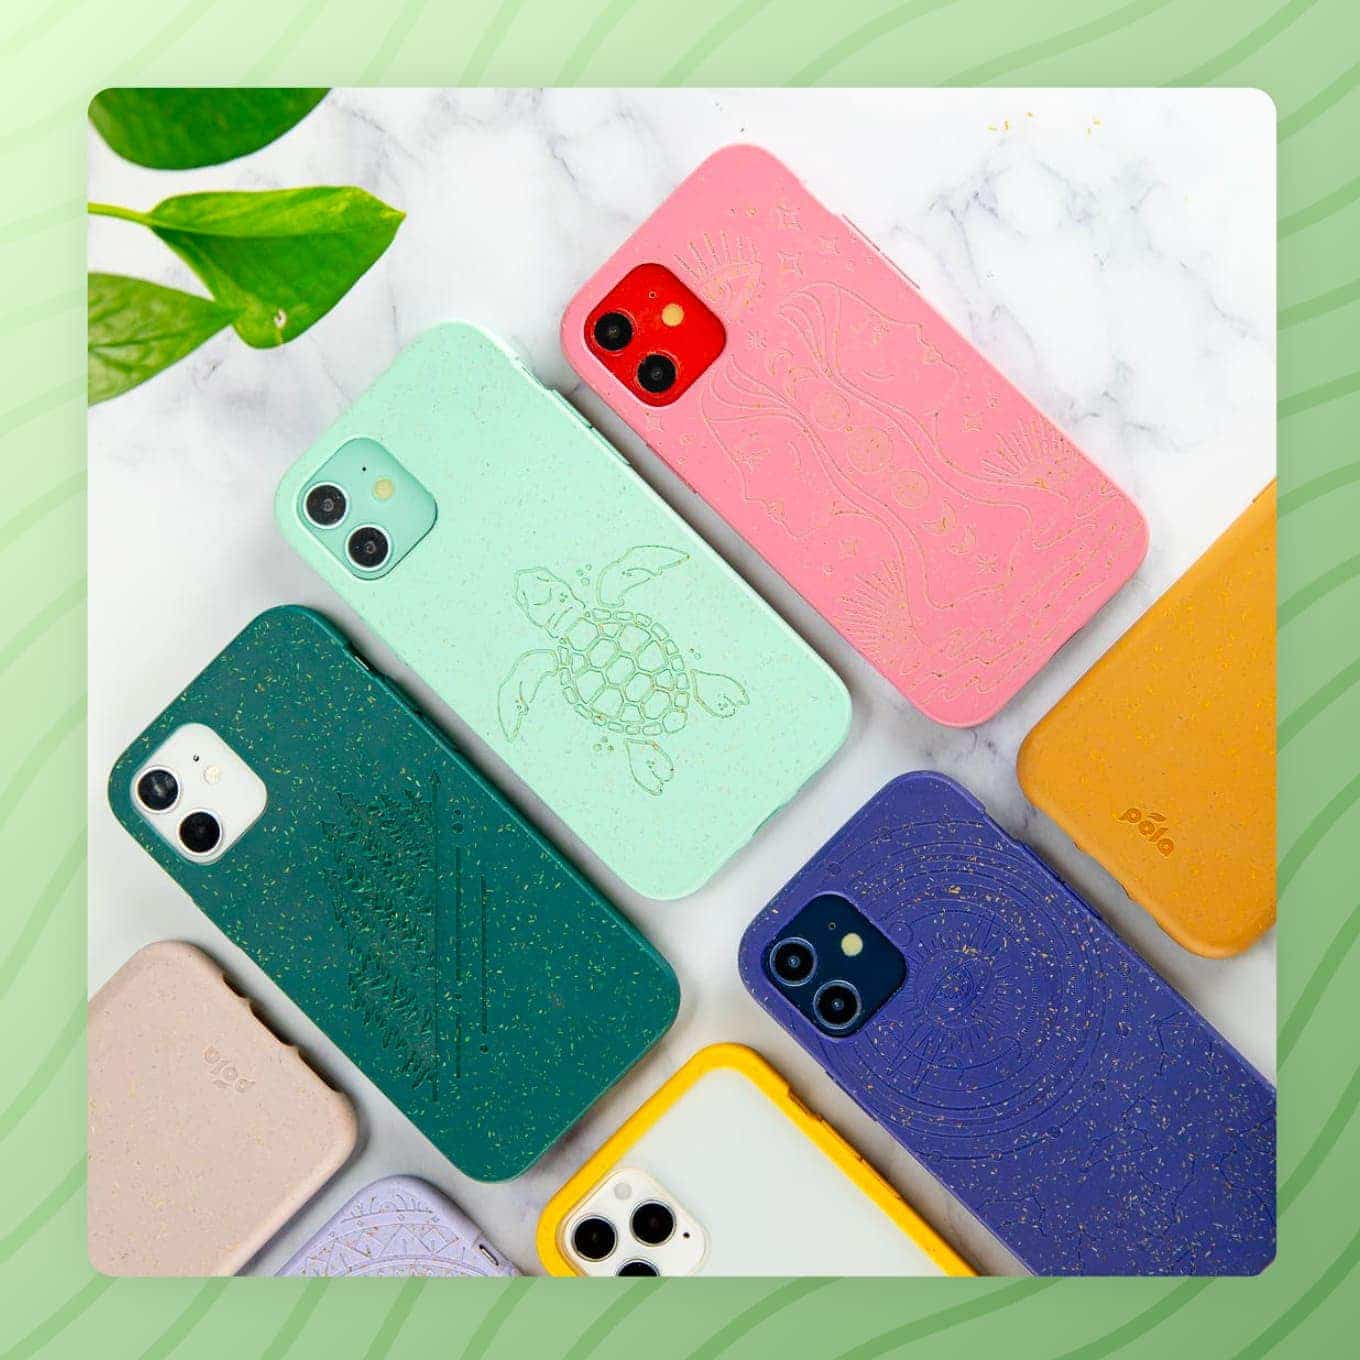 Several compostable phone cases